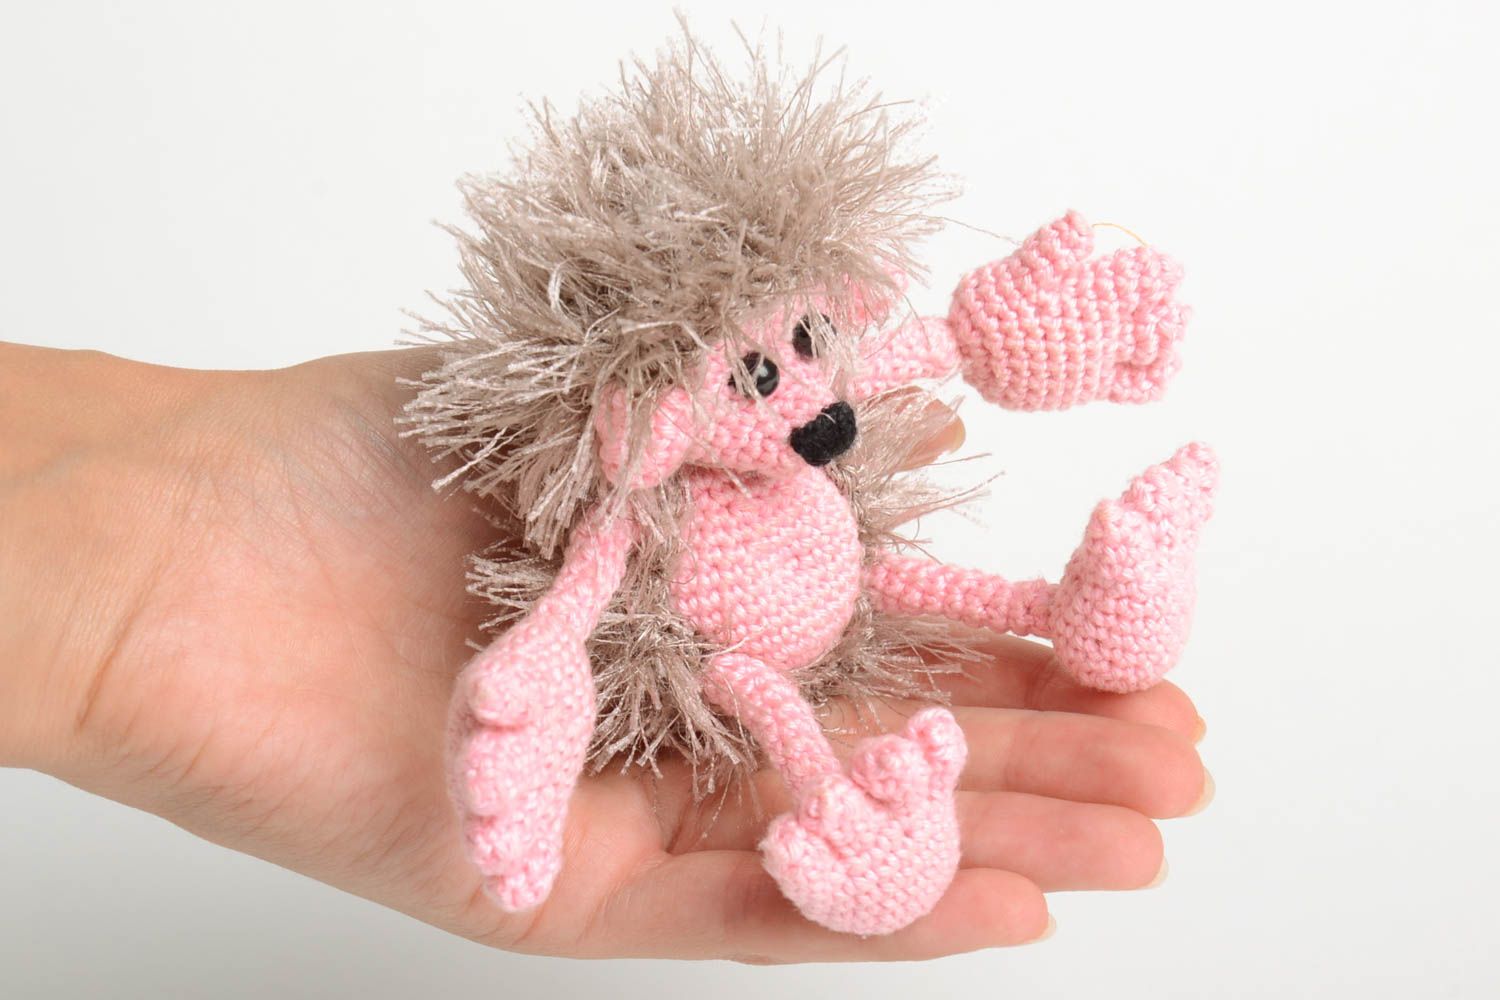 Handmade crocheted toy stylish unusual toy for kids funny hedgehog toy photo 5